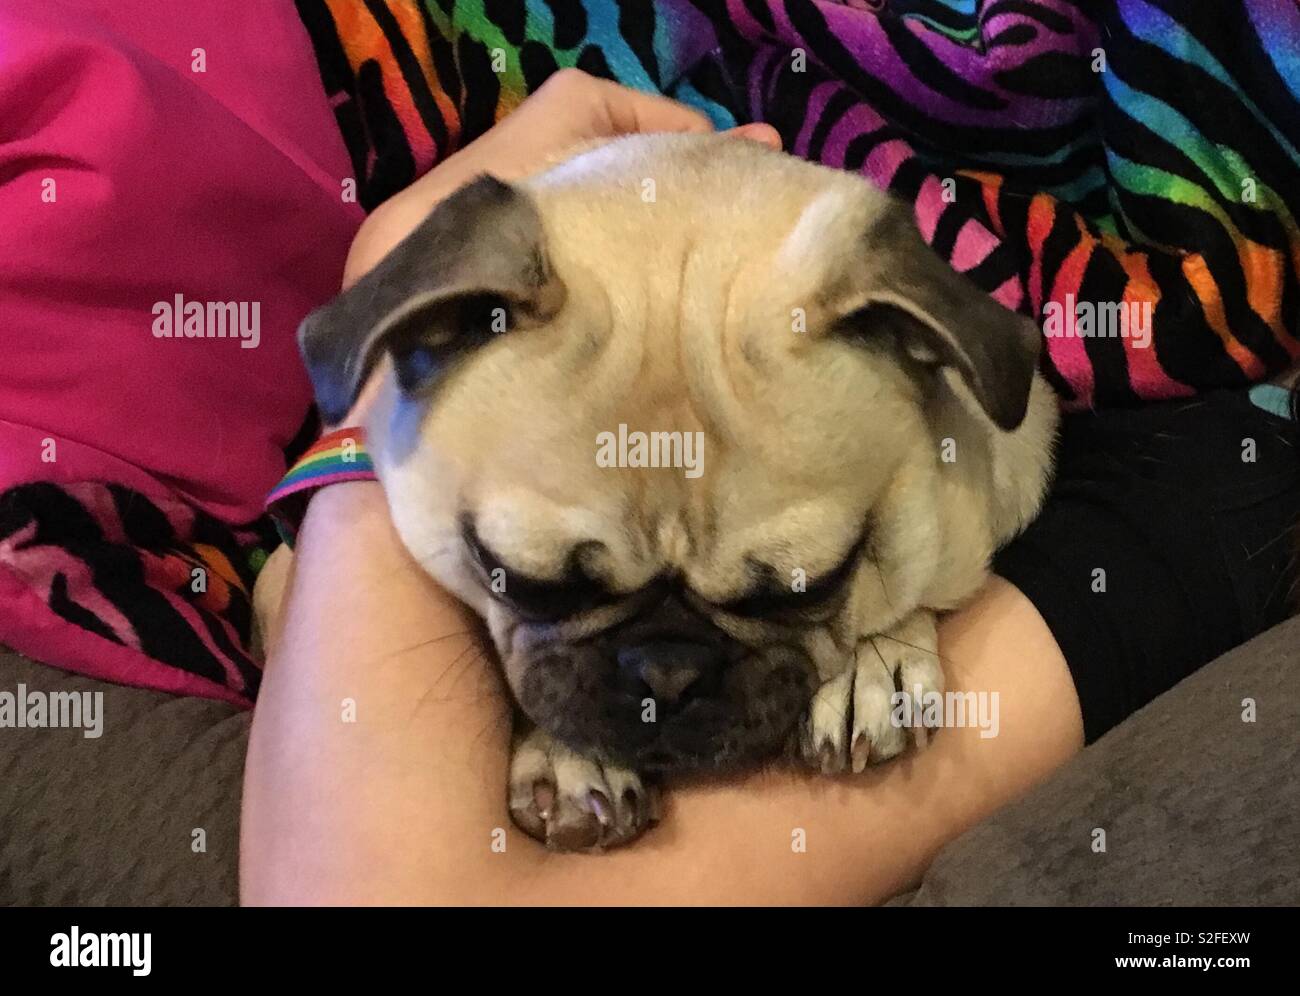 Shhh... there’s a Sleeping pug in my arms Stock Photo